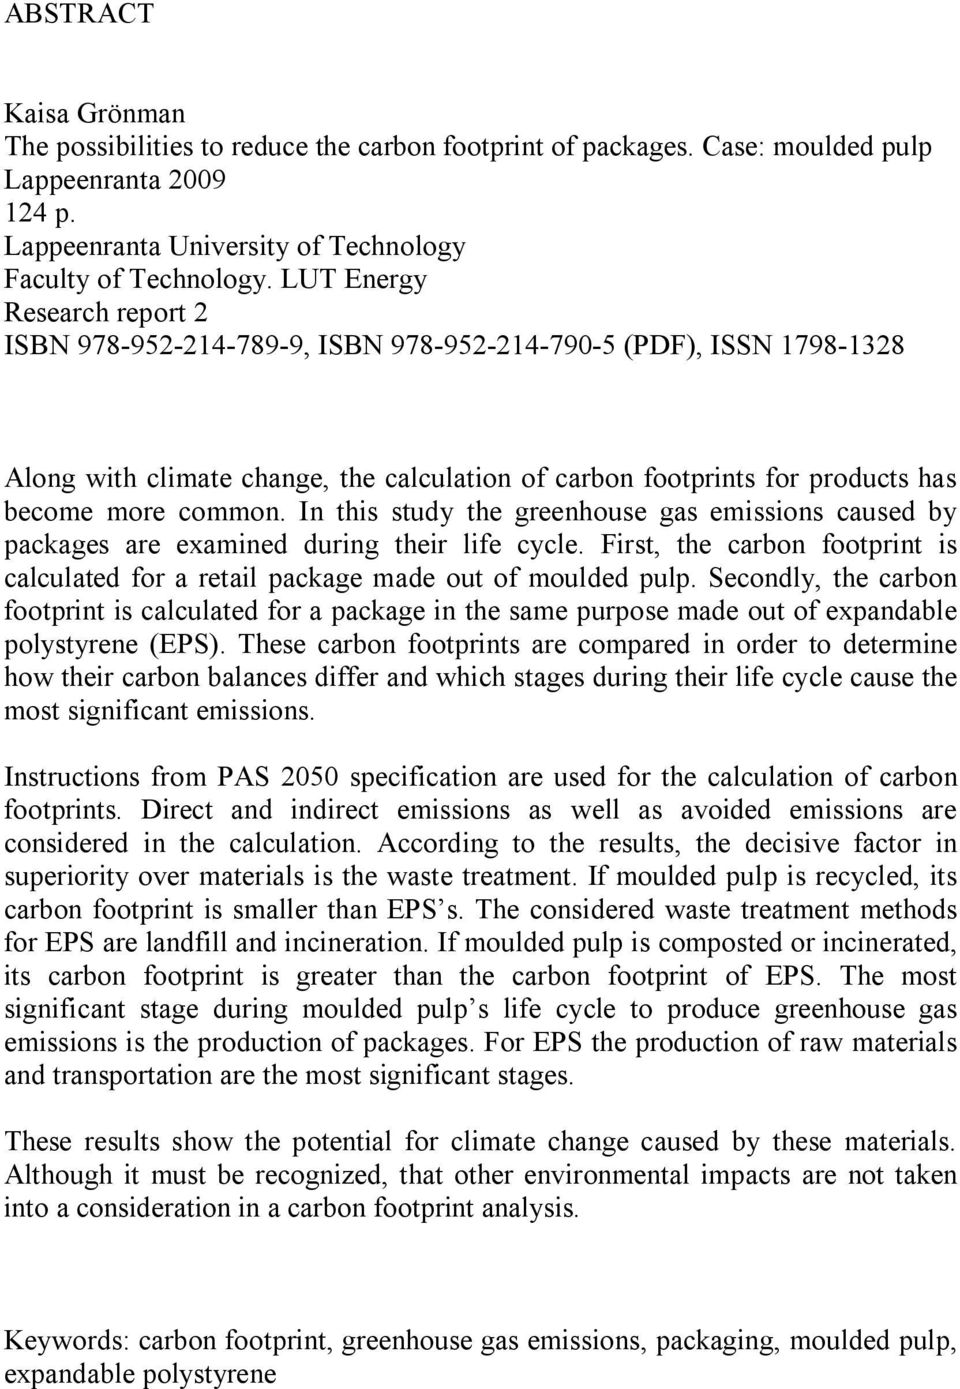 In this study the greenhouse gas emissions caused by packages are examined during their life cycle. First, the carbon footprint is calculated for a retail package made out of moulded pulp.